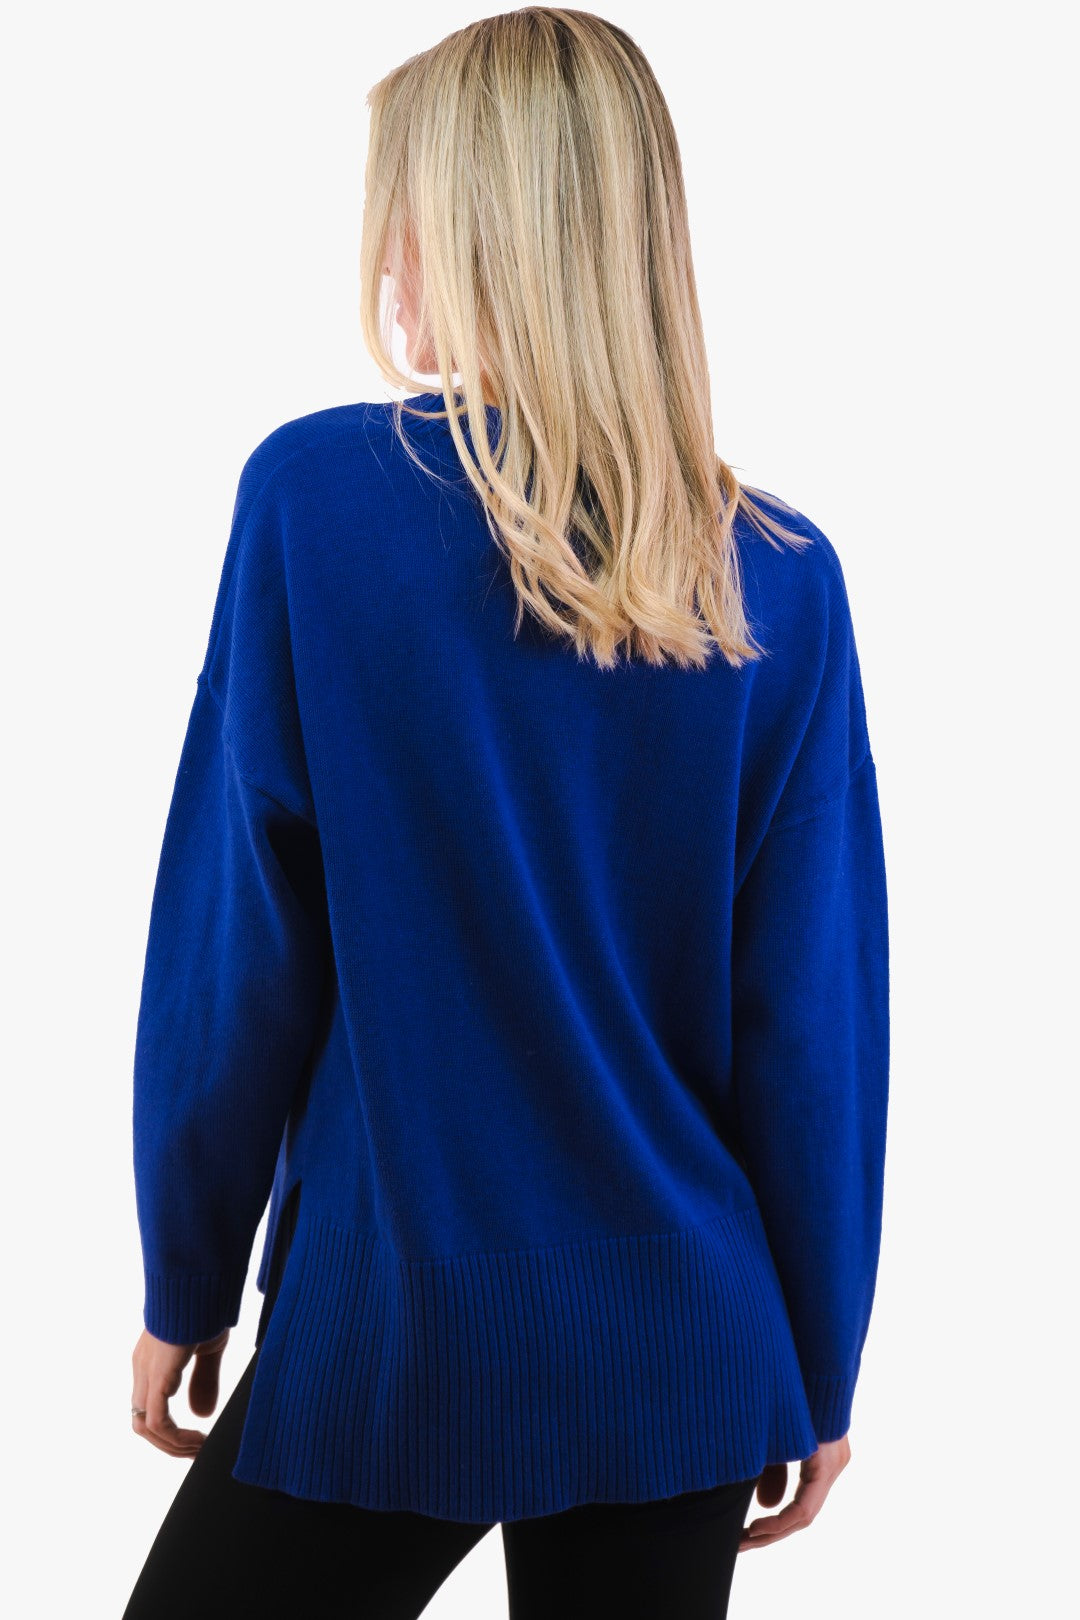 Blue Mauda Part Two sweater